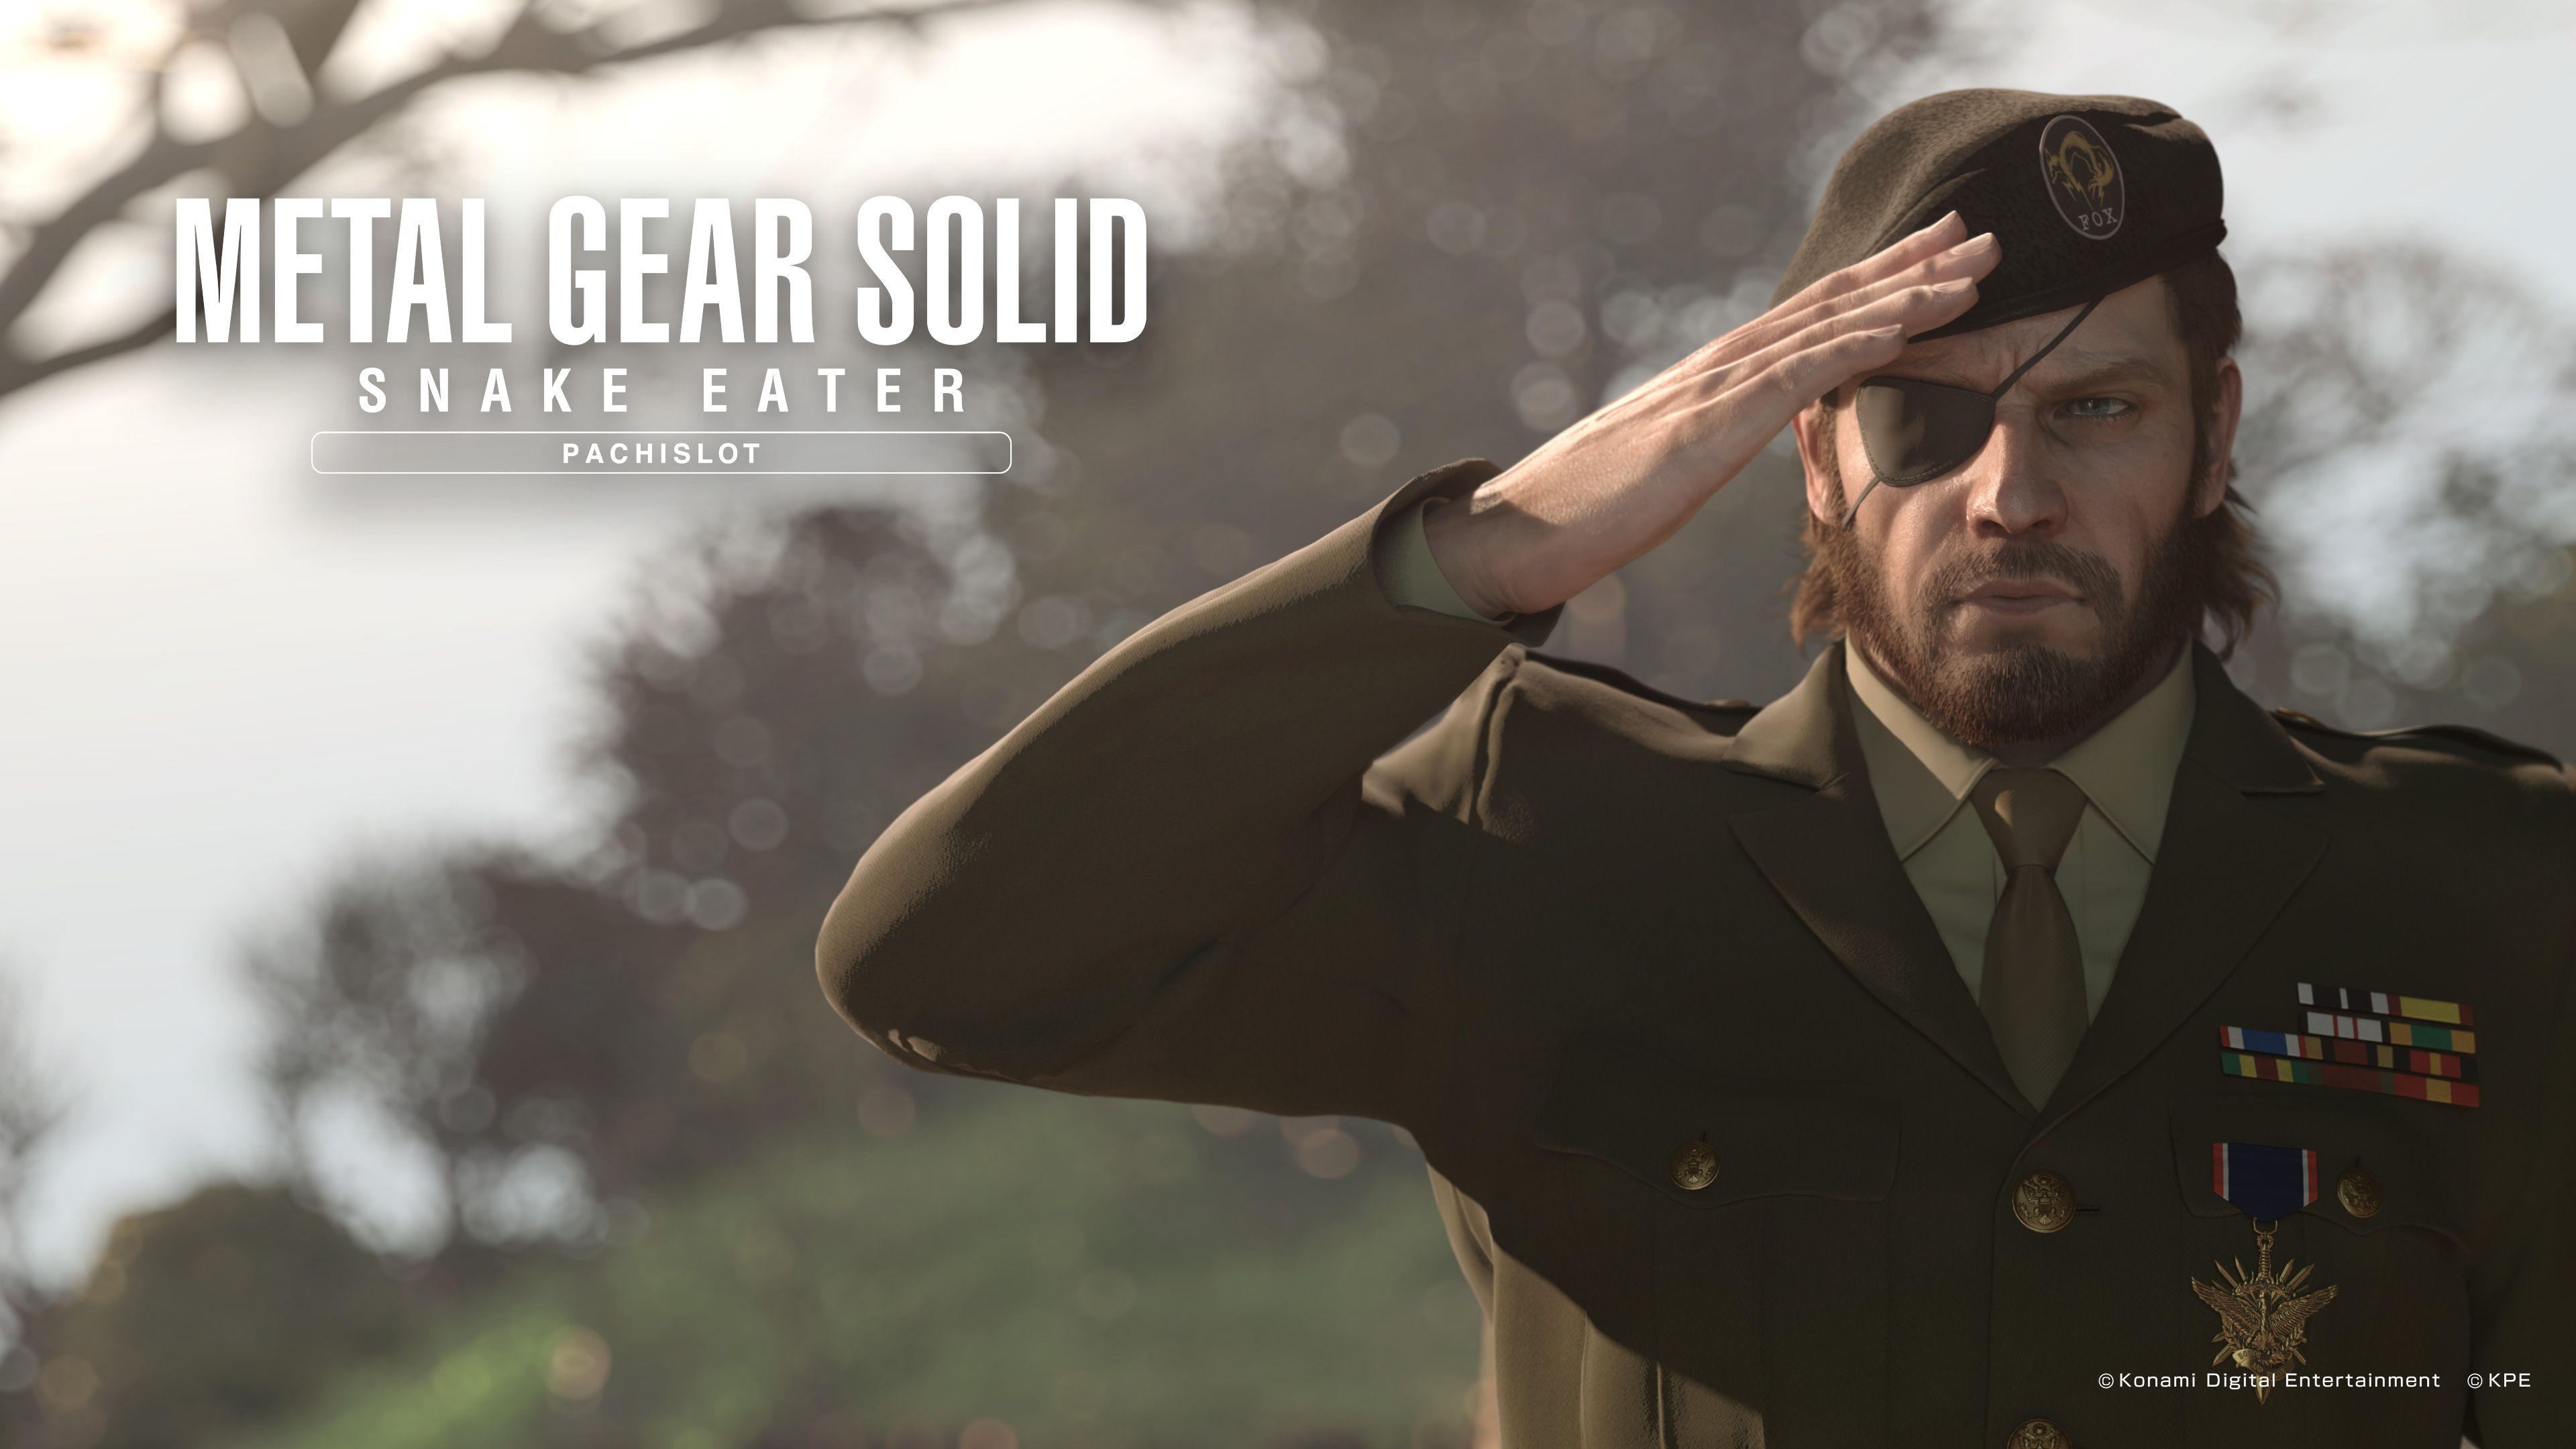 Official Metal Gear Solid Snake Eater Pachislot wallpaper released